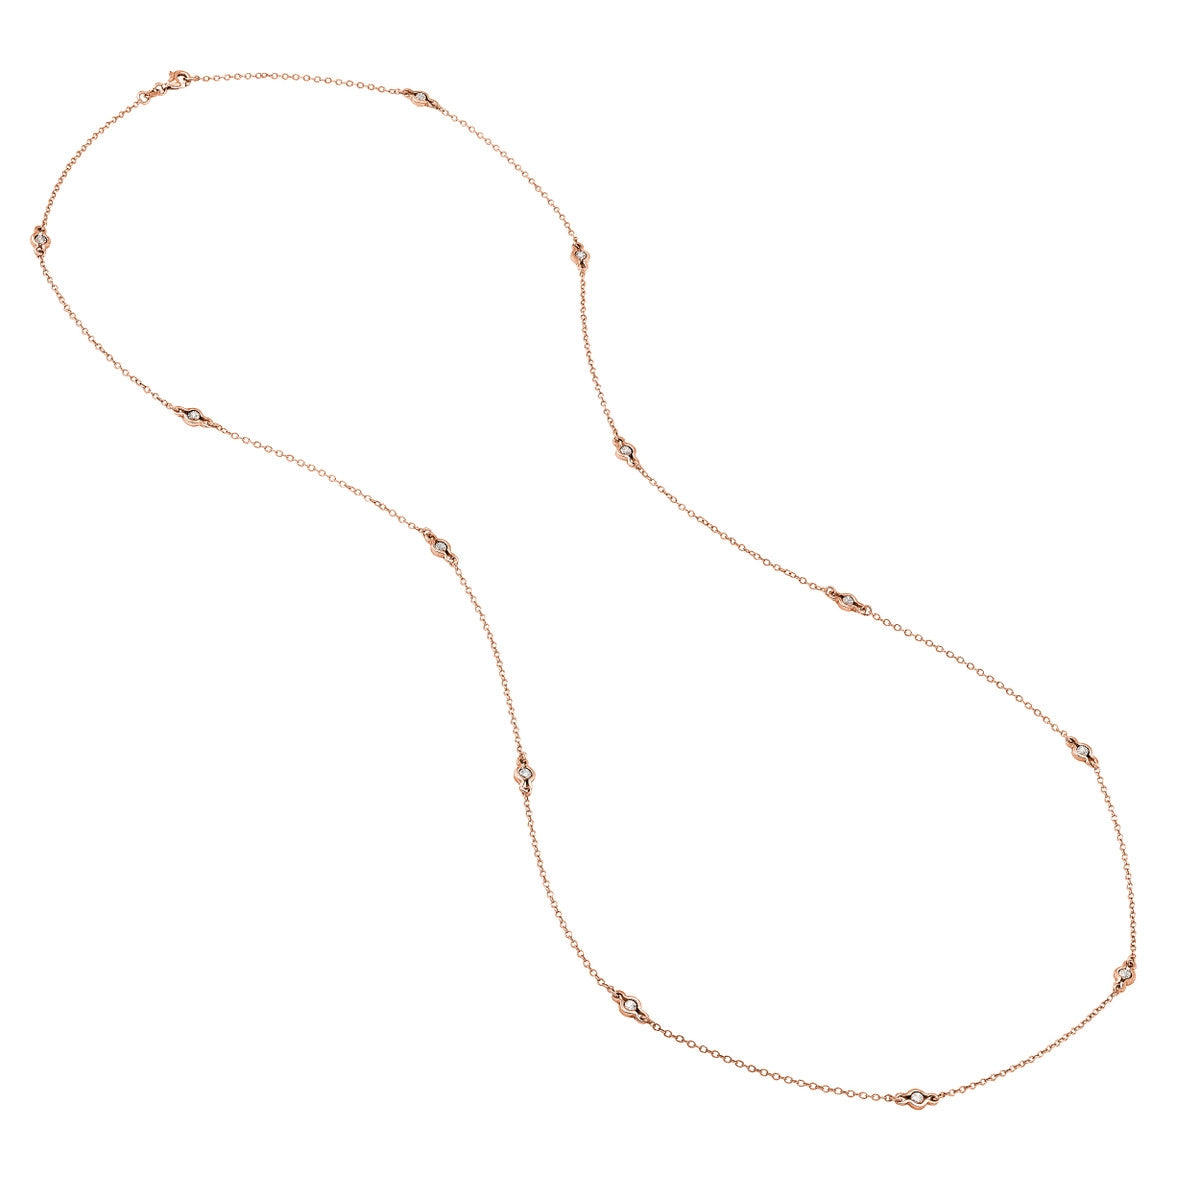 Long N Lovely Cable/Illusion D/C Station Necklace